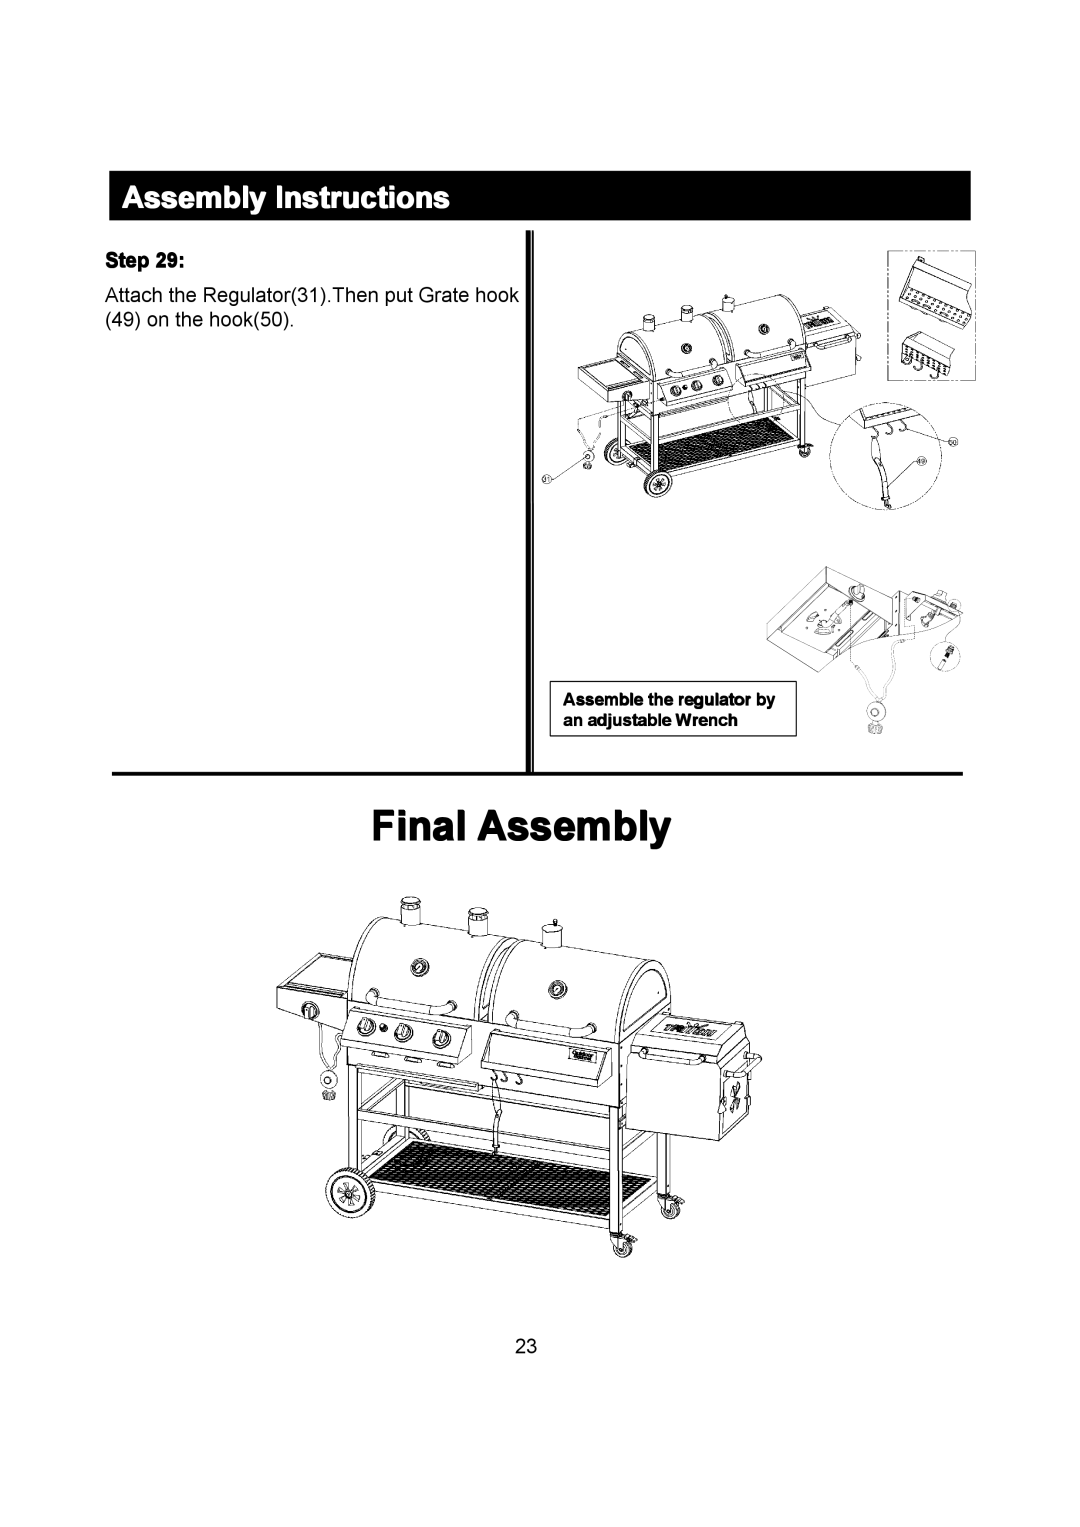 Outdoor Gourmet CG3023E Final Assembly, Assembly Instructions, Step, Assemble the regulator by an adjustable Wrench 